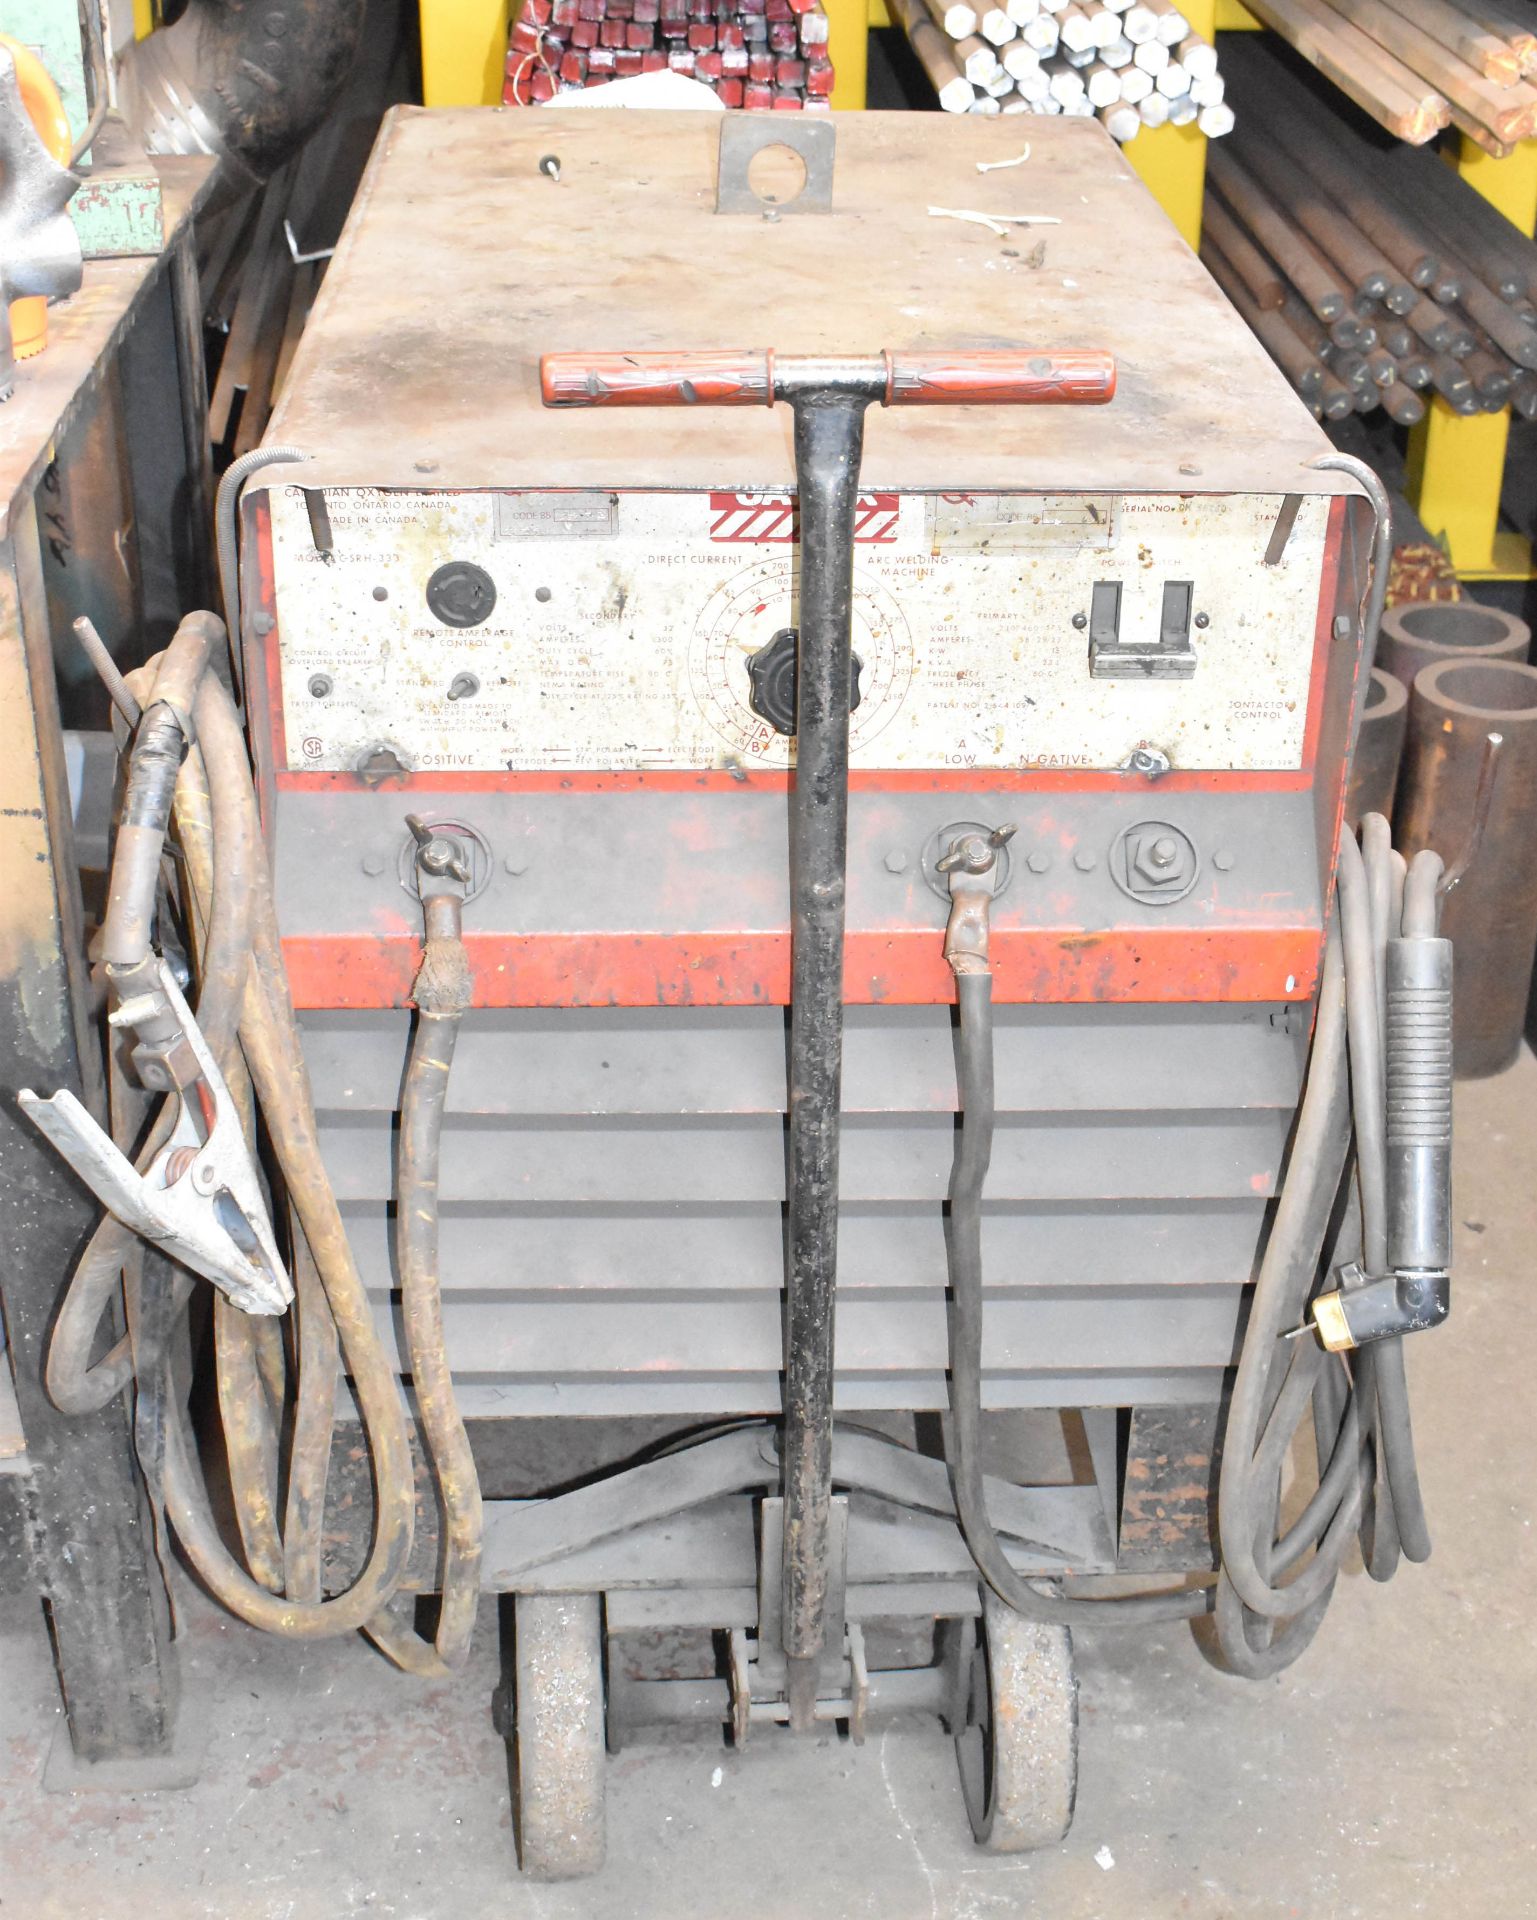 CANOX C-SRH-333 STICK WELDER WITH CABLES AND GUN, S/N CM58260 (LOCATED AT 5830 AV. ANDOVER, MONT-